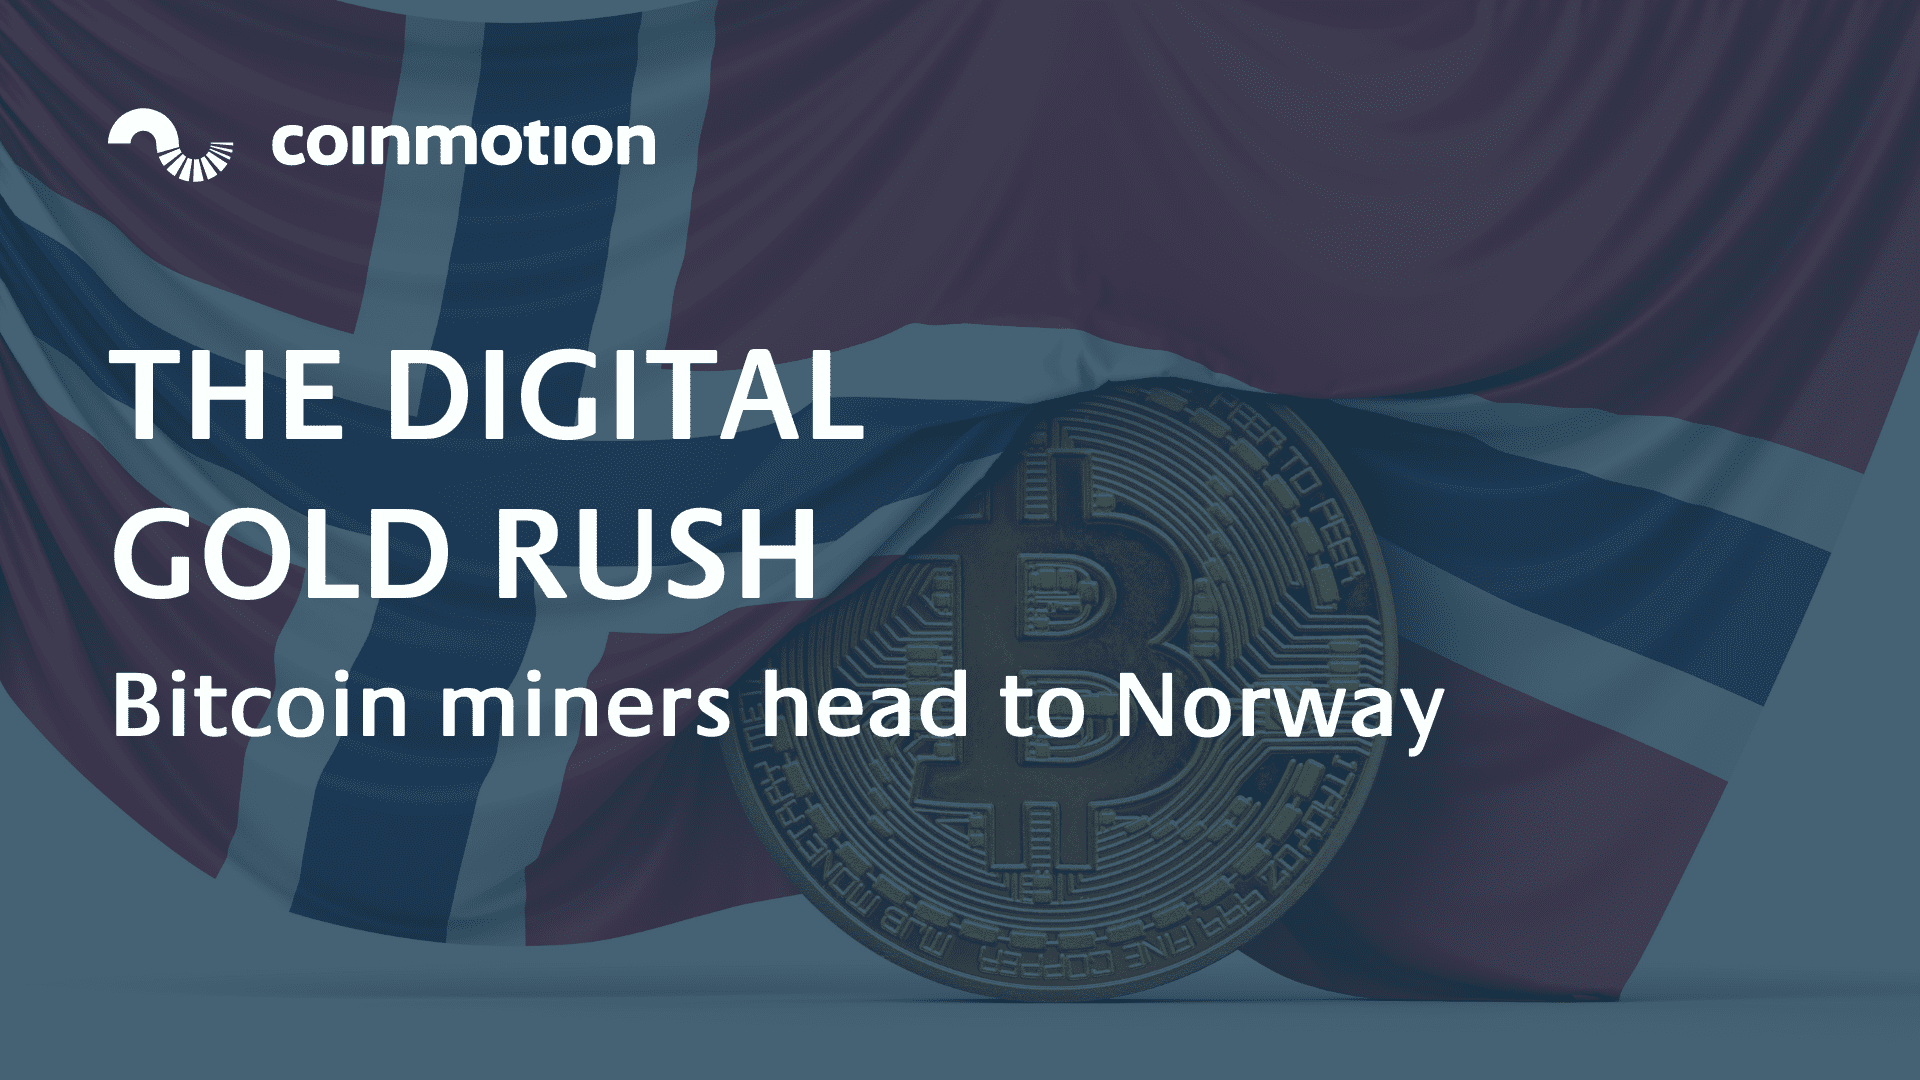 How did Norway become the largest Bitcoin mining hub in Europe?